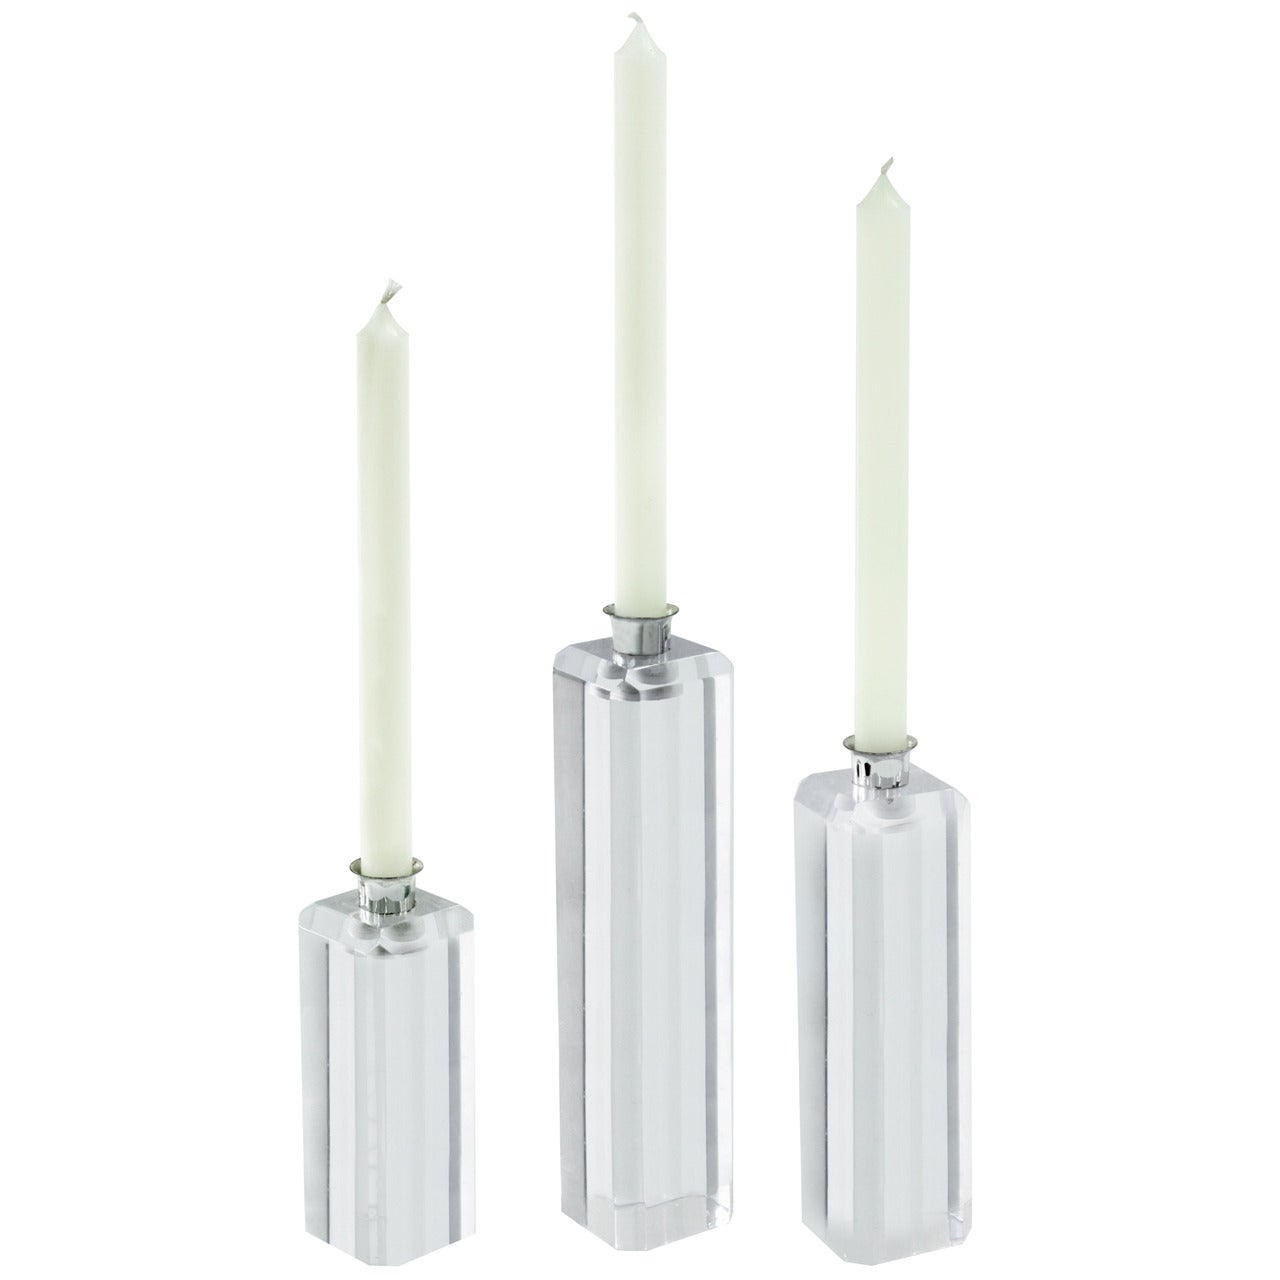 Set of Three Candlestick Holders in Lucite